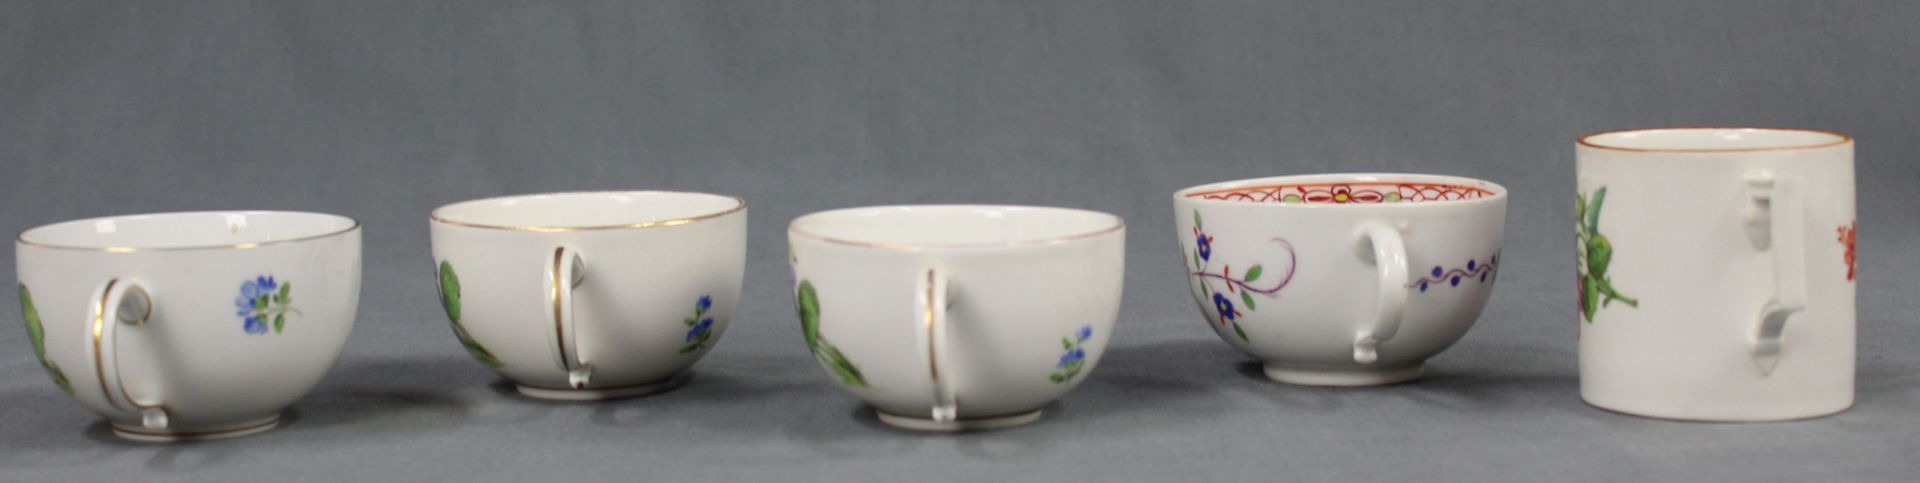 Set of porcelain. Old. Also Meissen and Nymphenburg. - Image 11 of 17